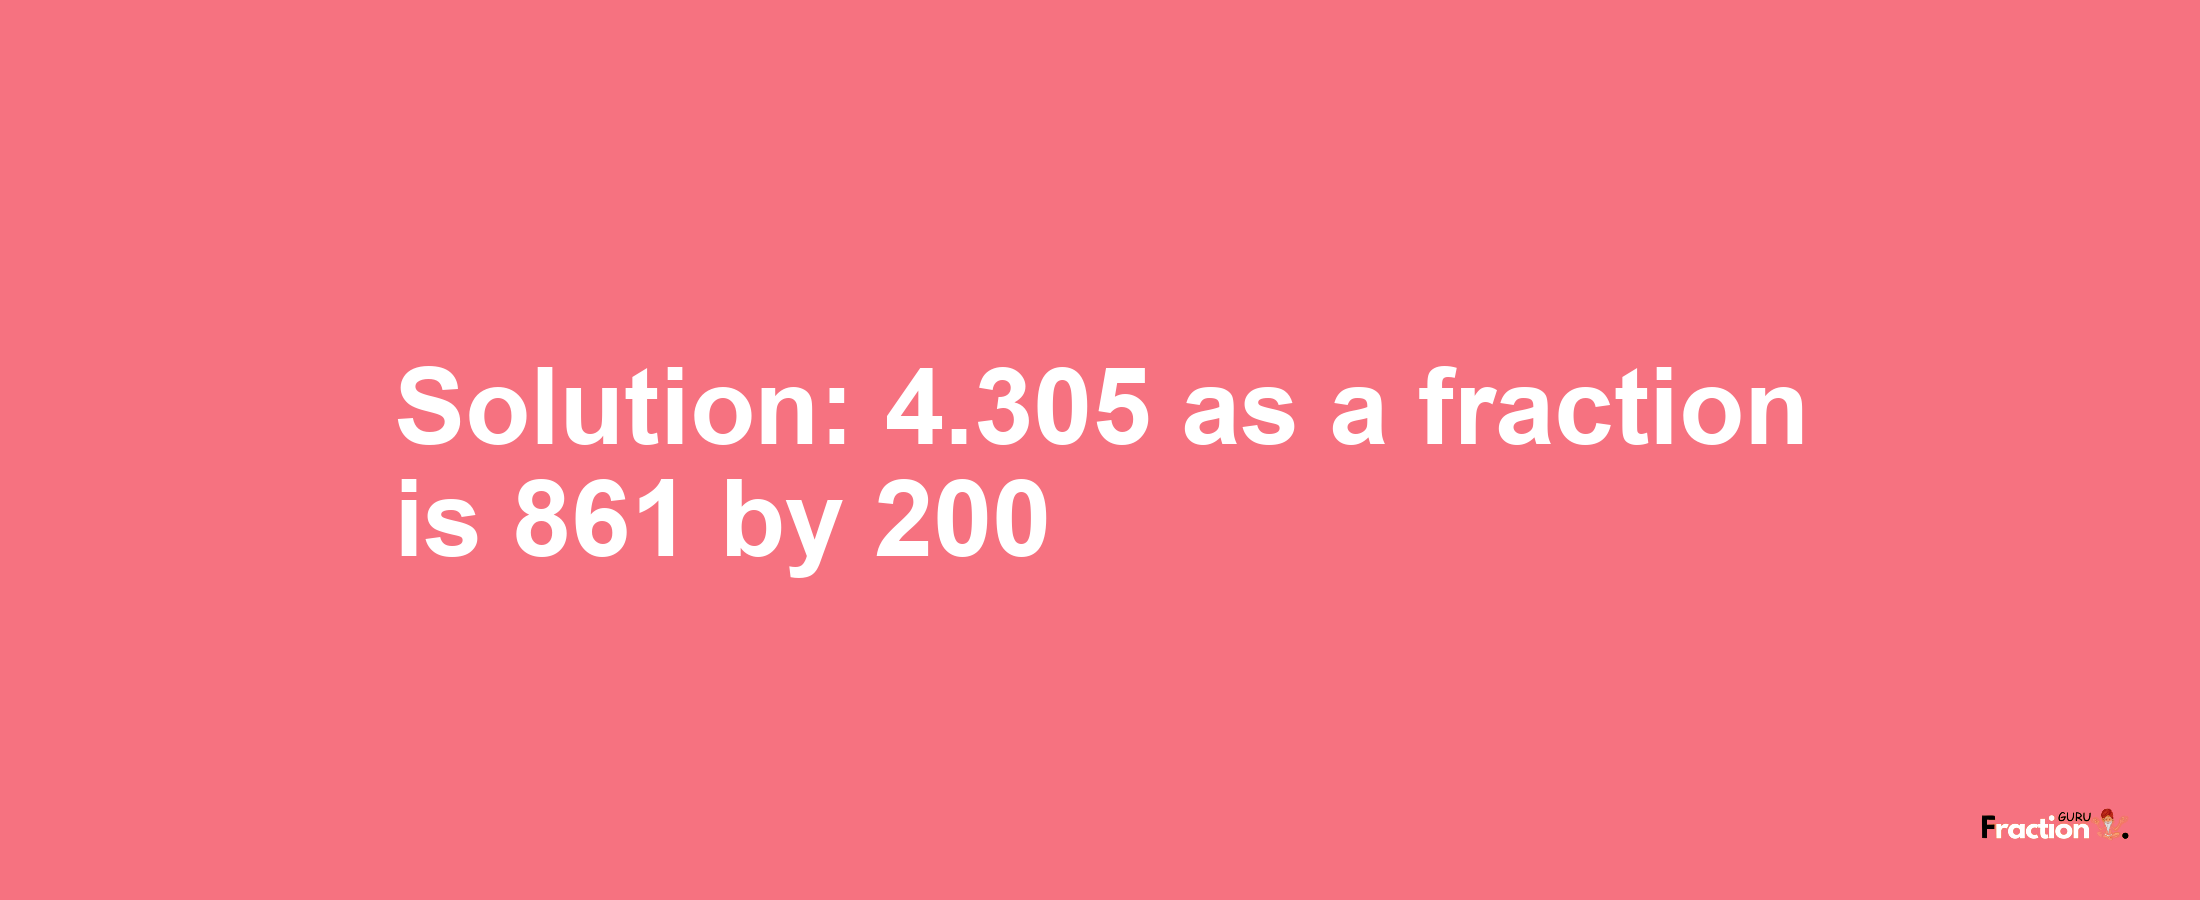 Solution:4.305 as a fraction is 861/200